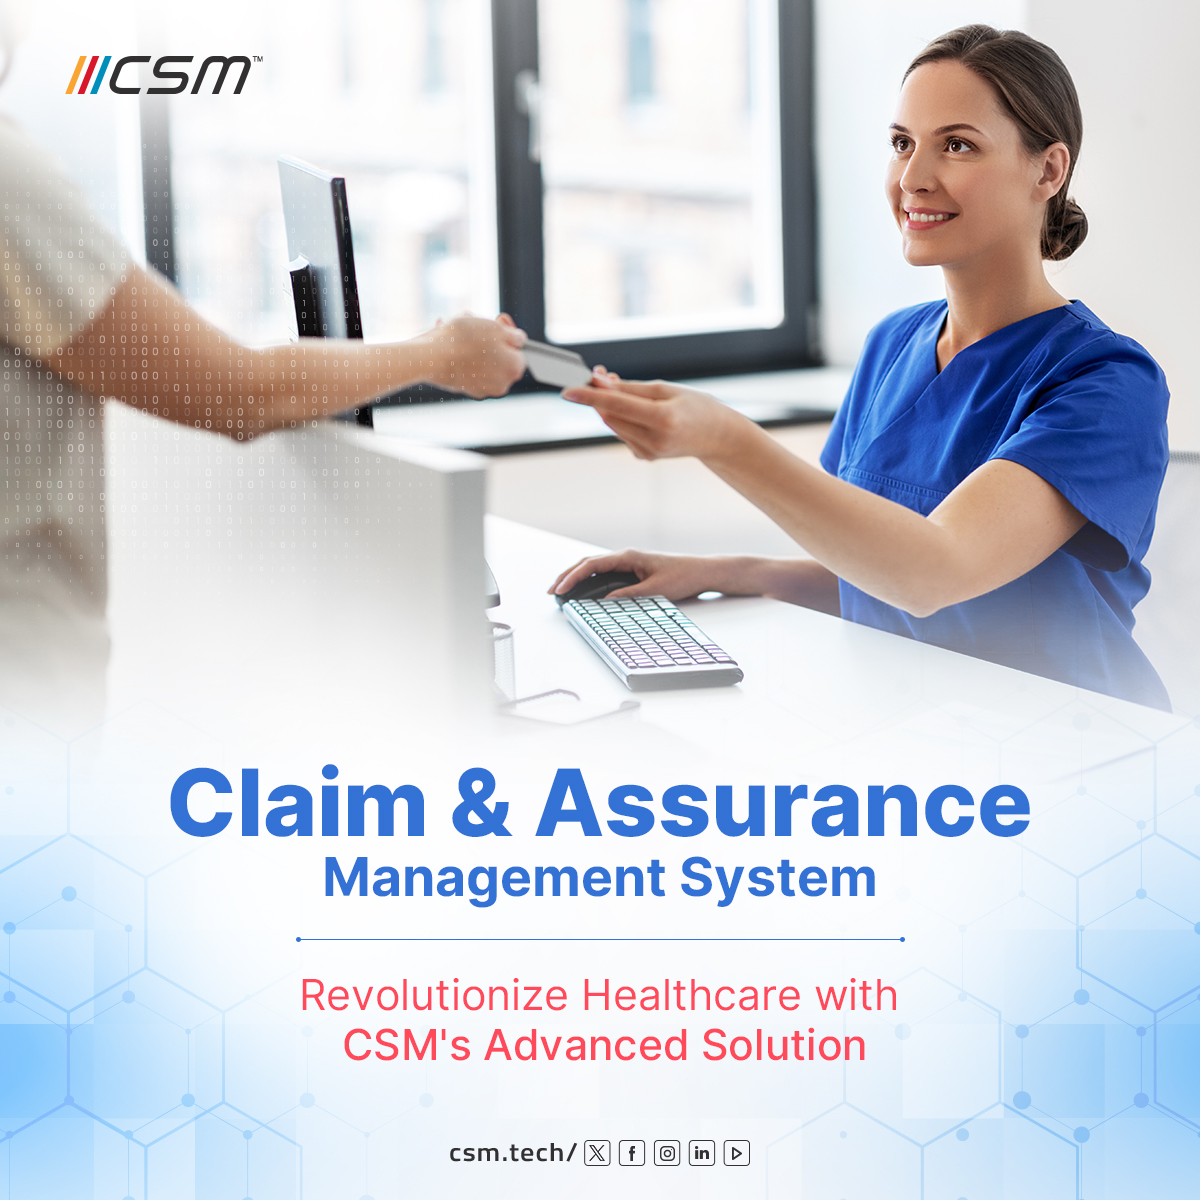 Revolutionize Claim & Assurance Operations with CSM Tech's Advanced Solution! 

👉 Know More: bit.ly/3rkZx2i  

#CSMTech #healthcare #ClaimManagement #HealthTech #QualityCare